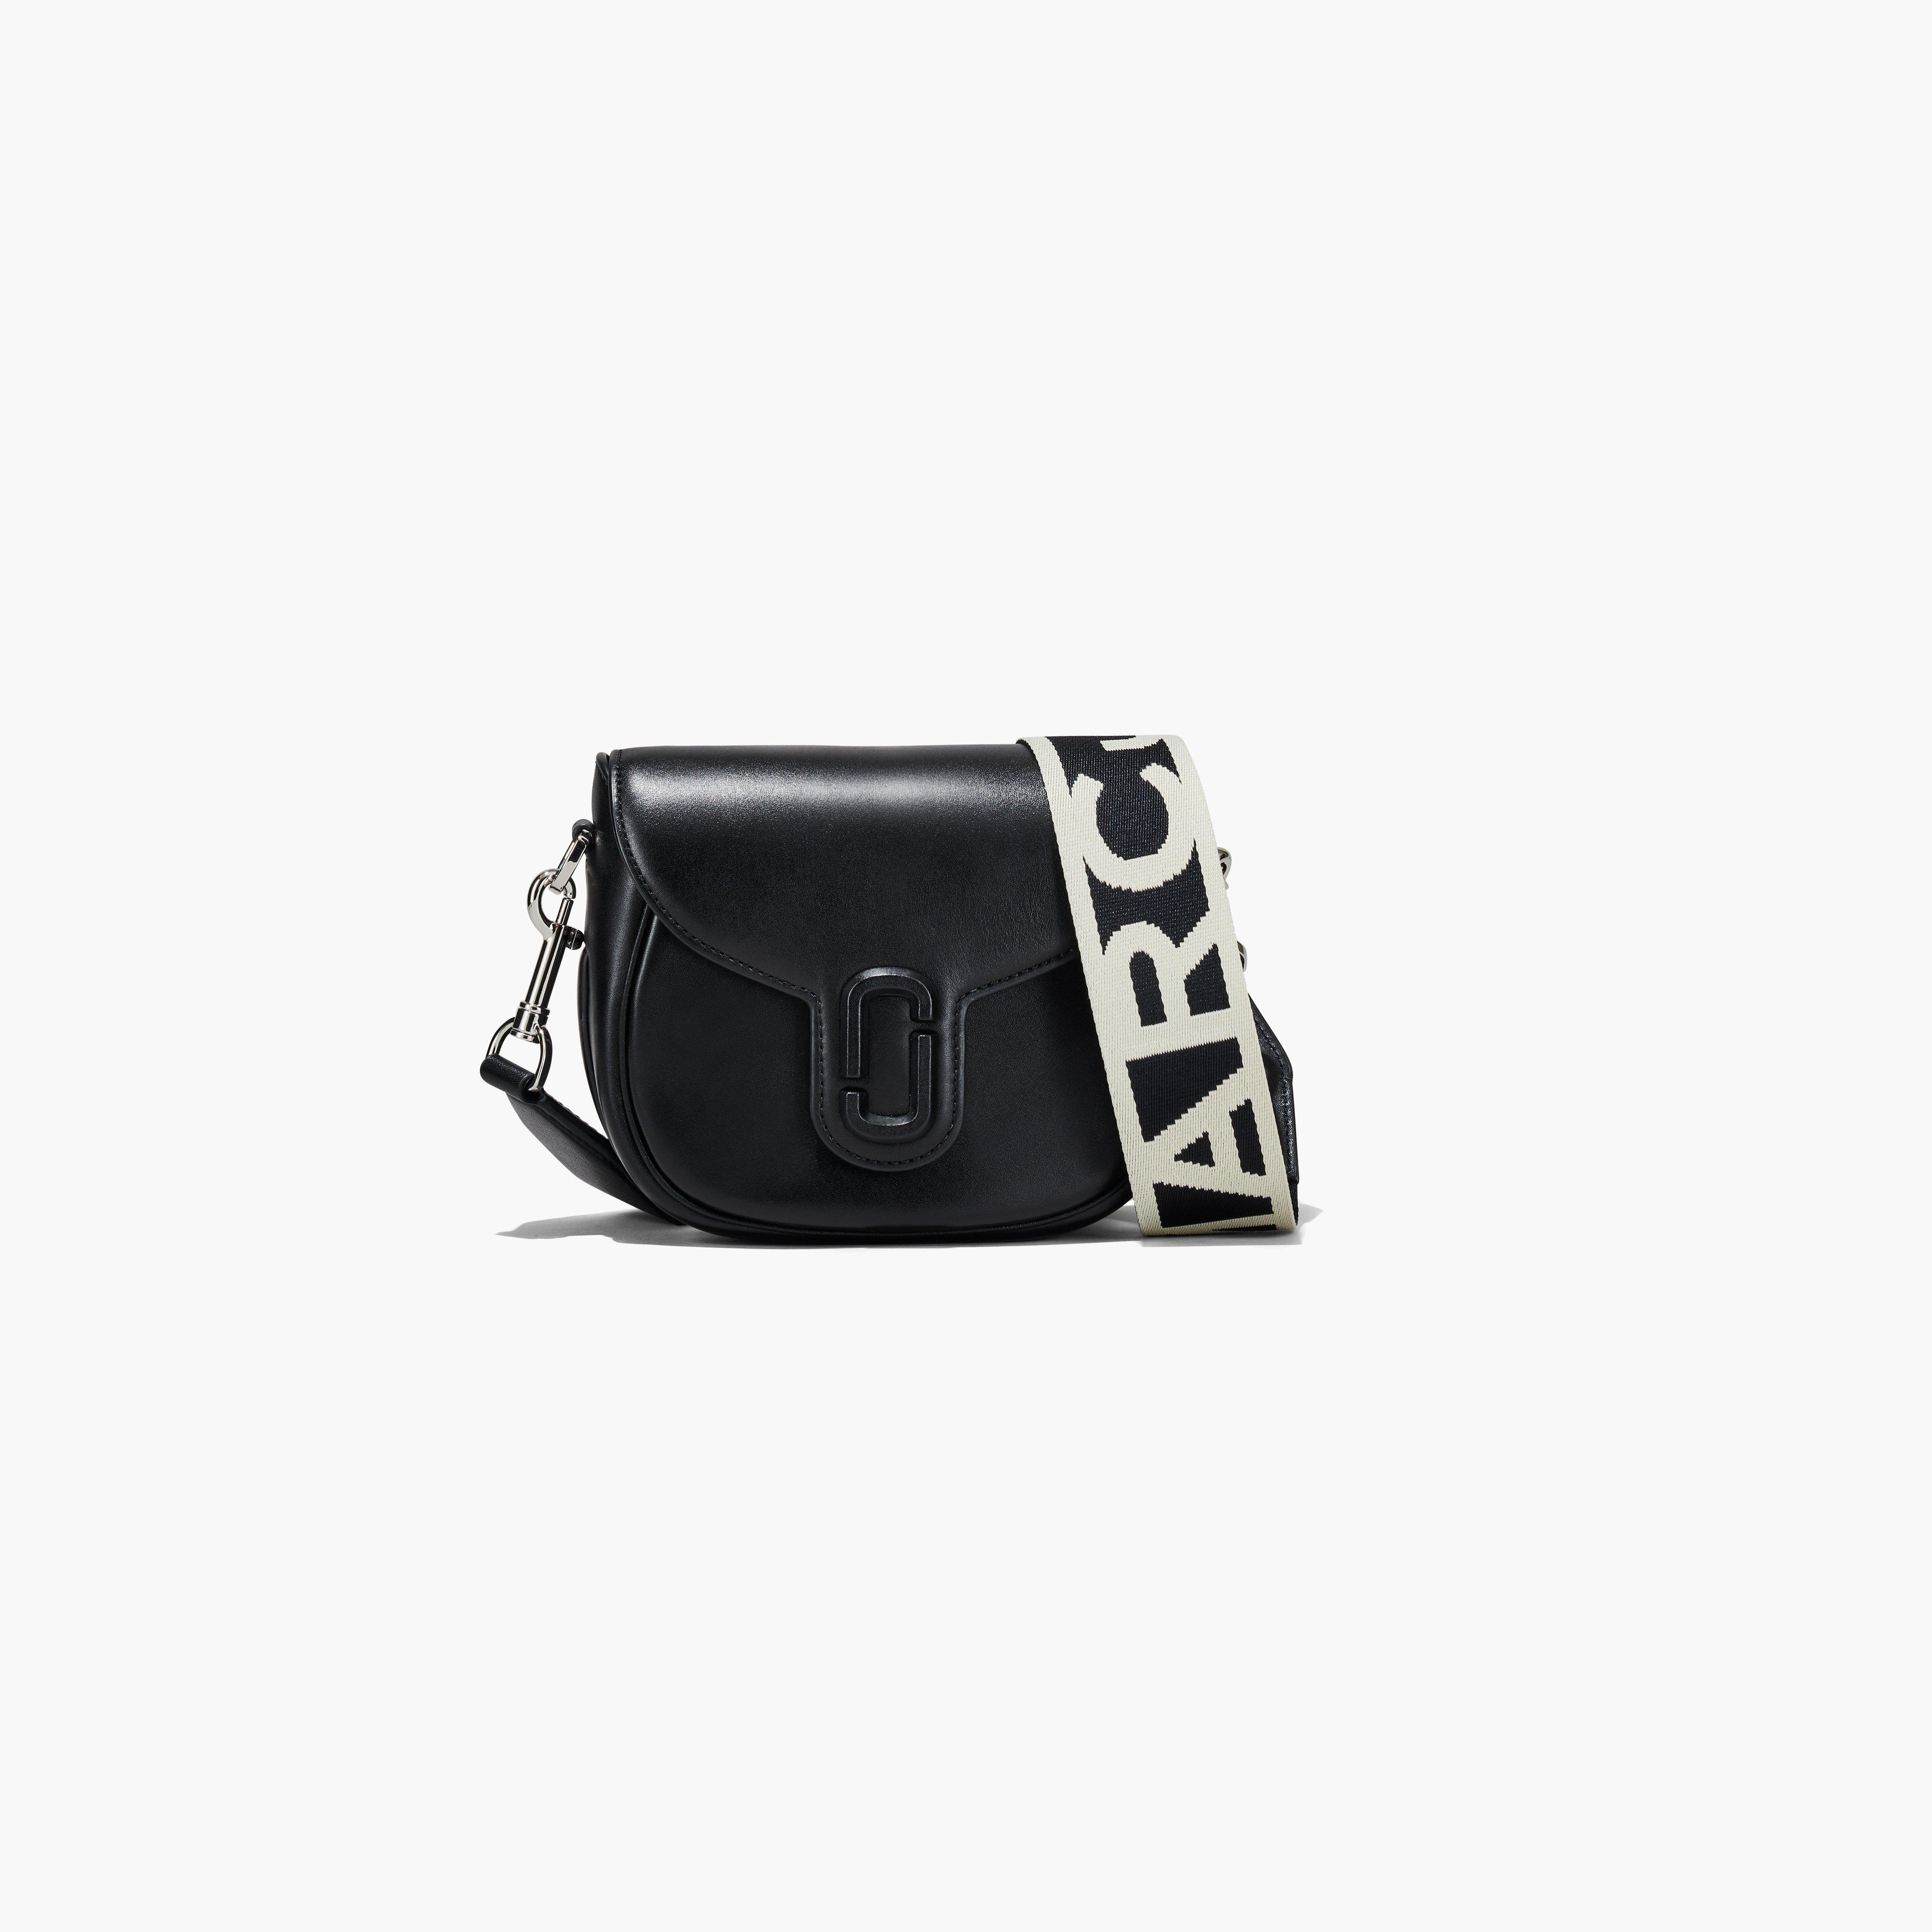 Marc by Marc jacobs The J Marc Small Saddle Bag,BLACK